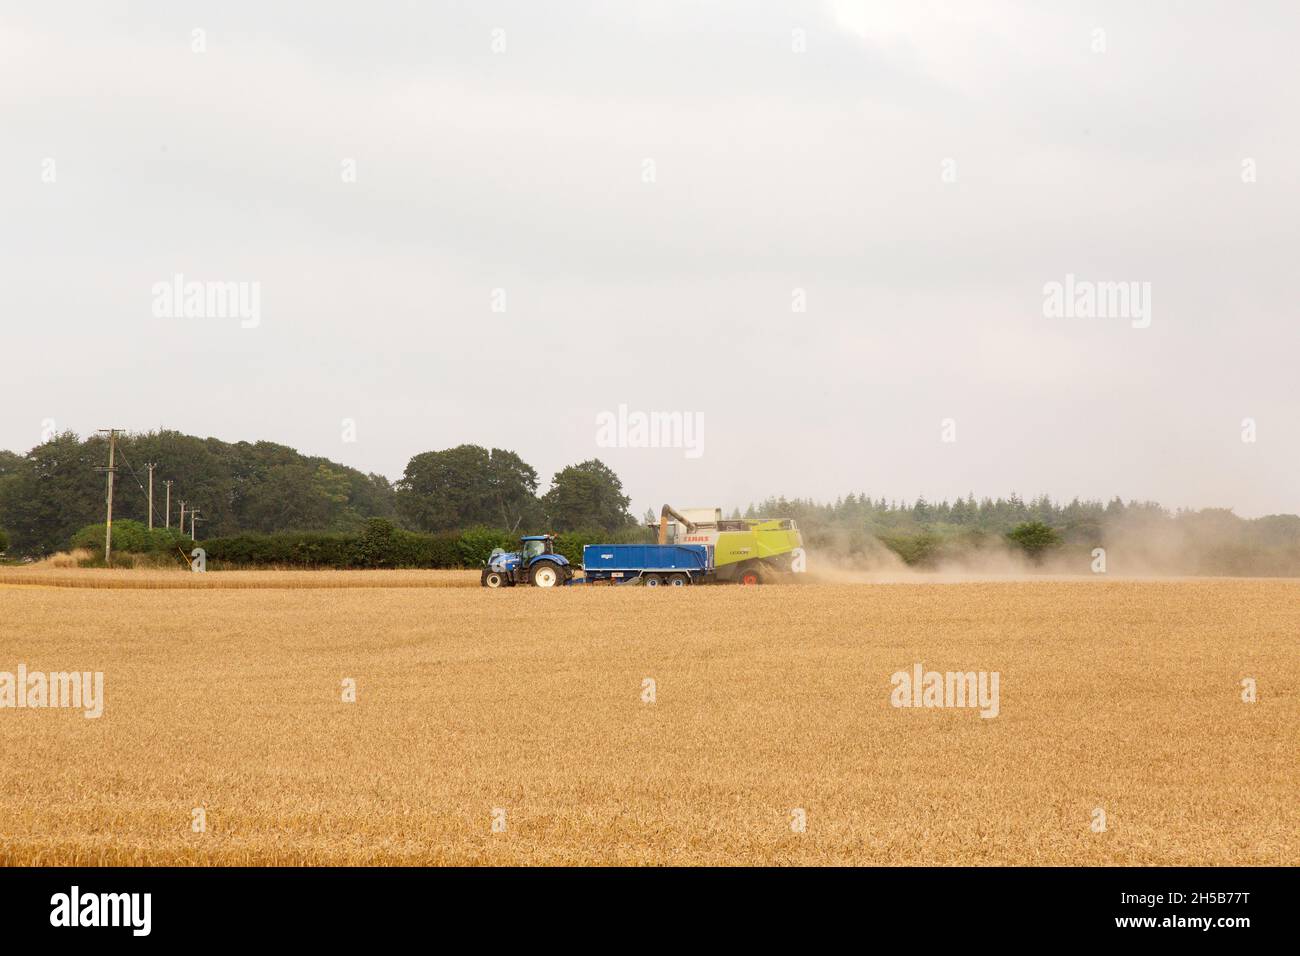 Claas combine harvester working in a field of wheat, Medstead, Hampshire, England, United Kingdom. Stock Photo